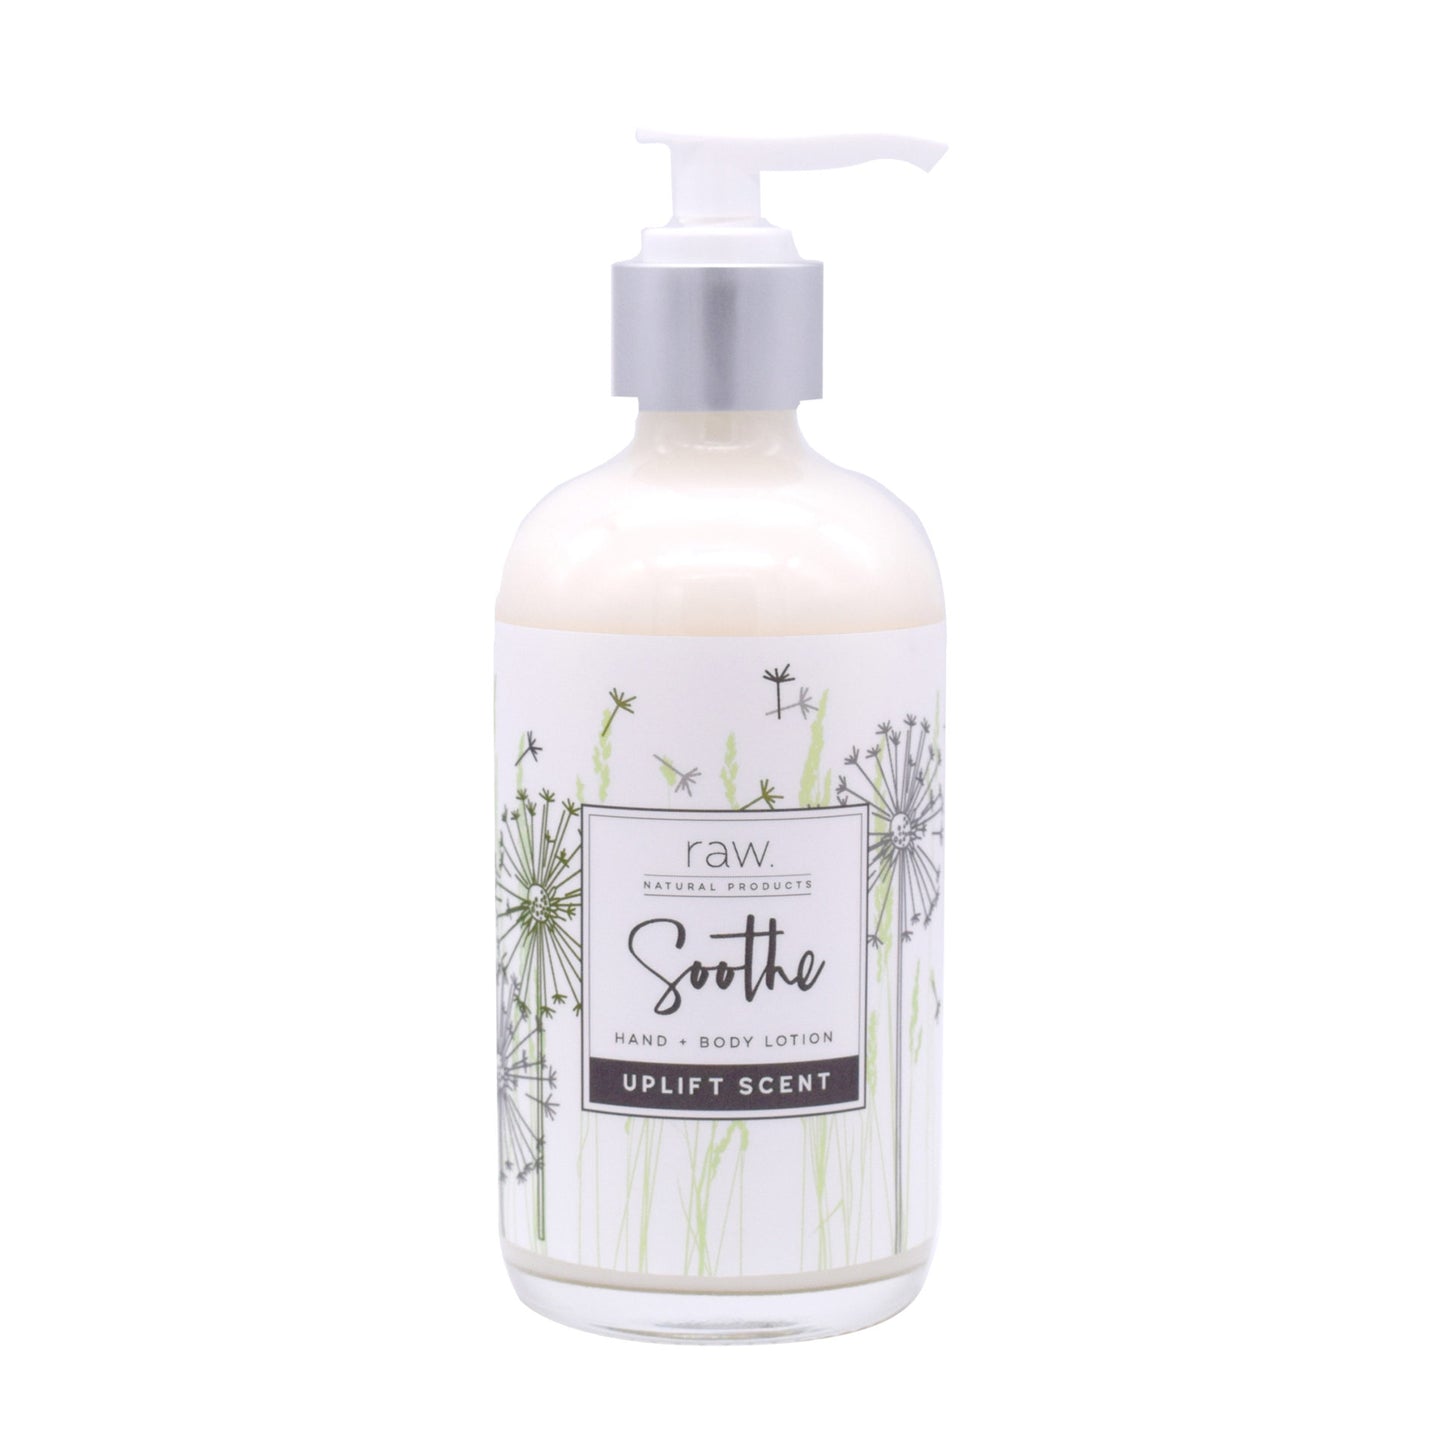 Soothe.  Hand and Body Lotion